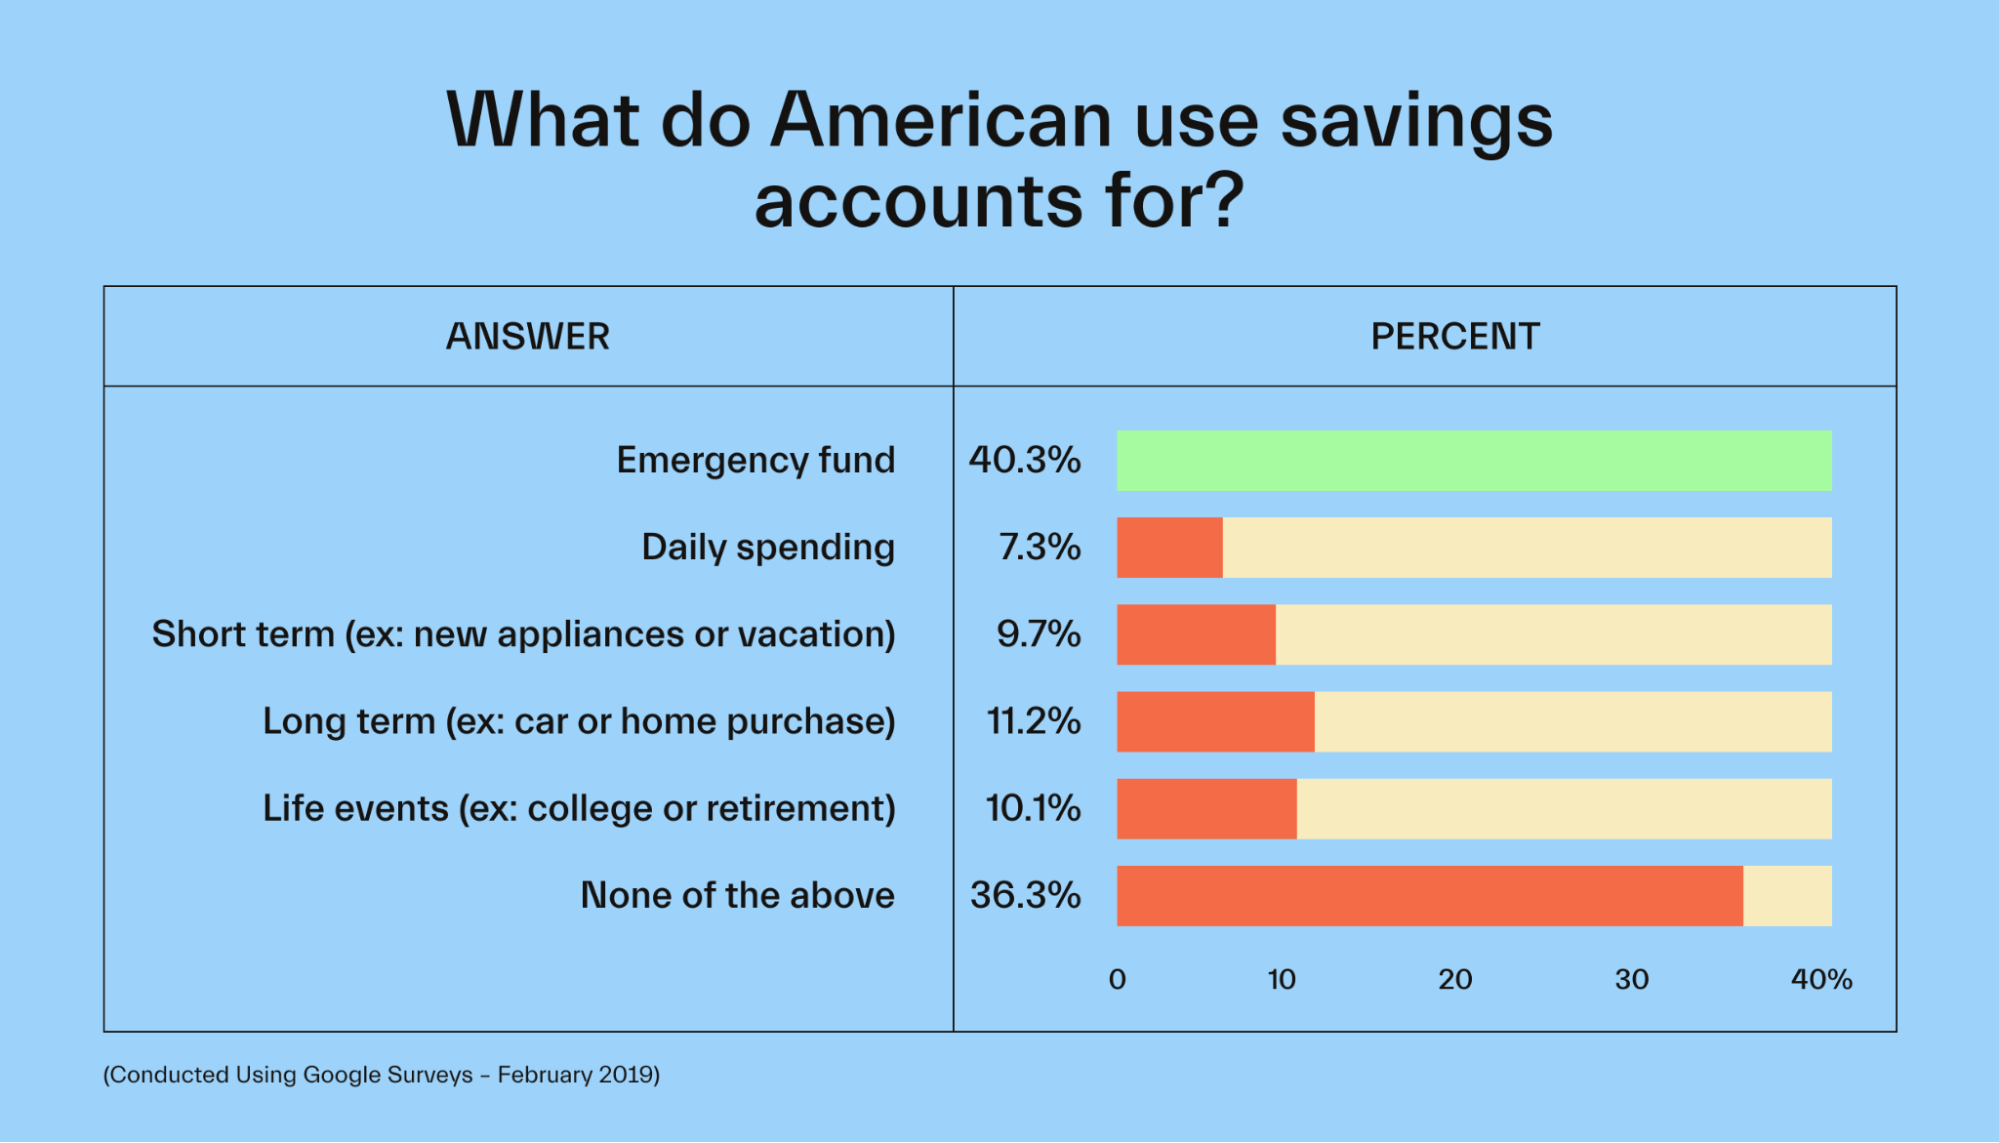 What do American use savings accounts for?